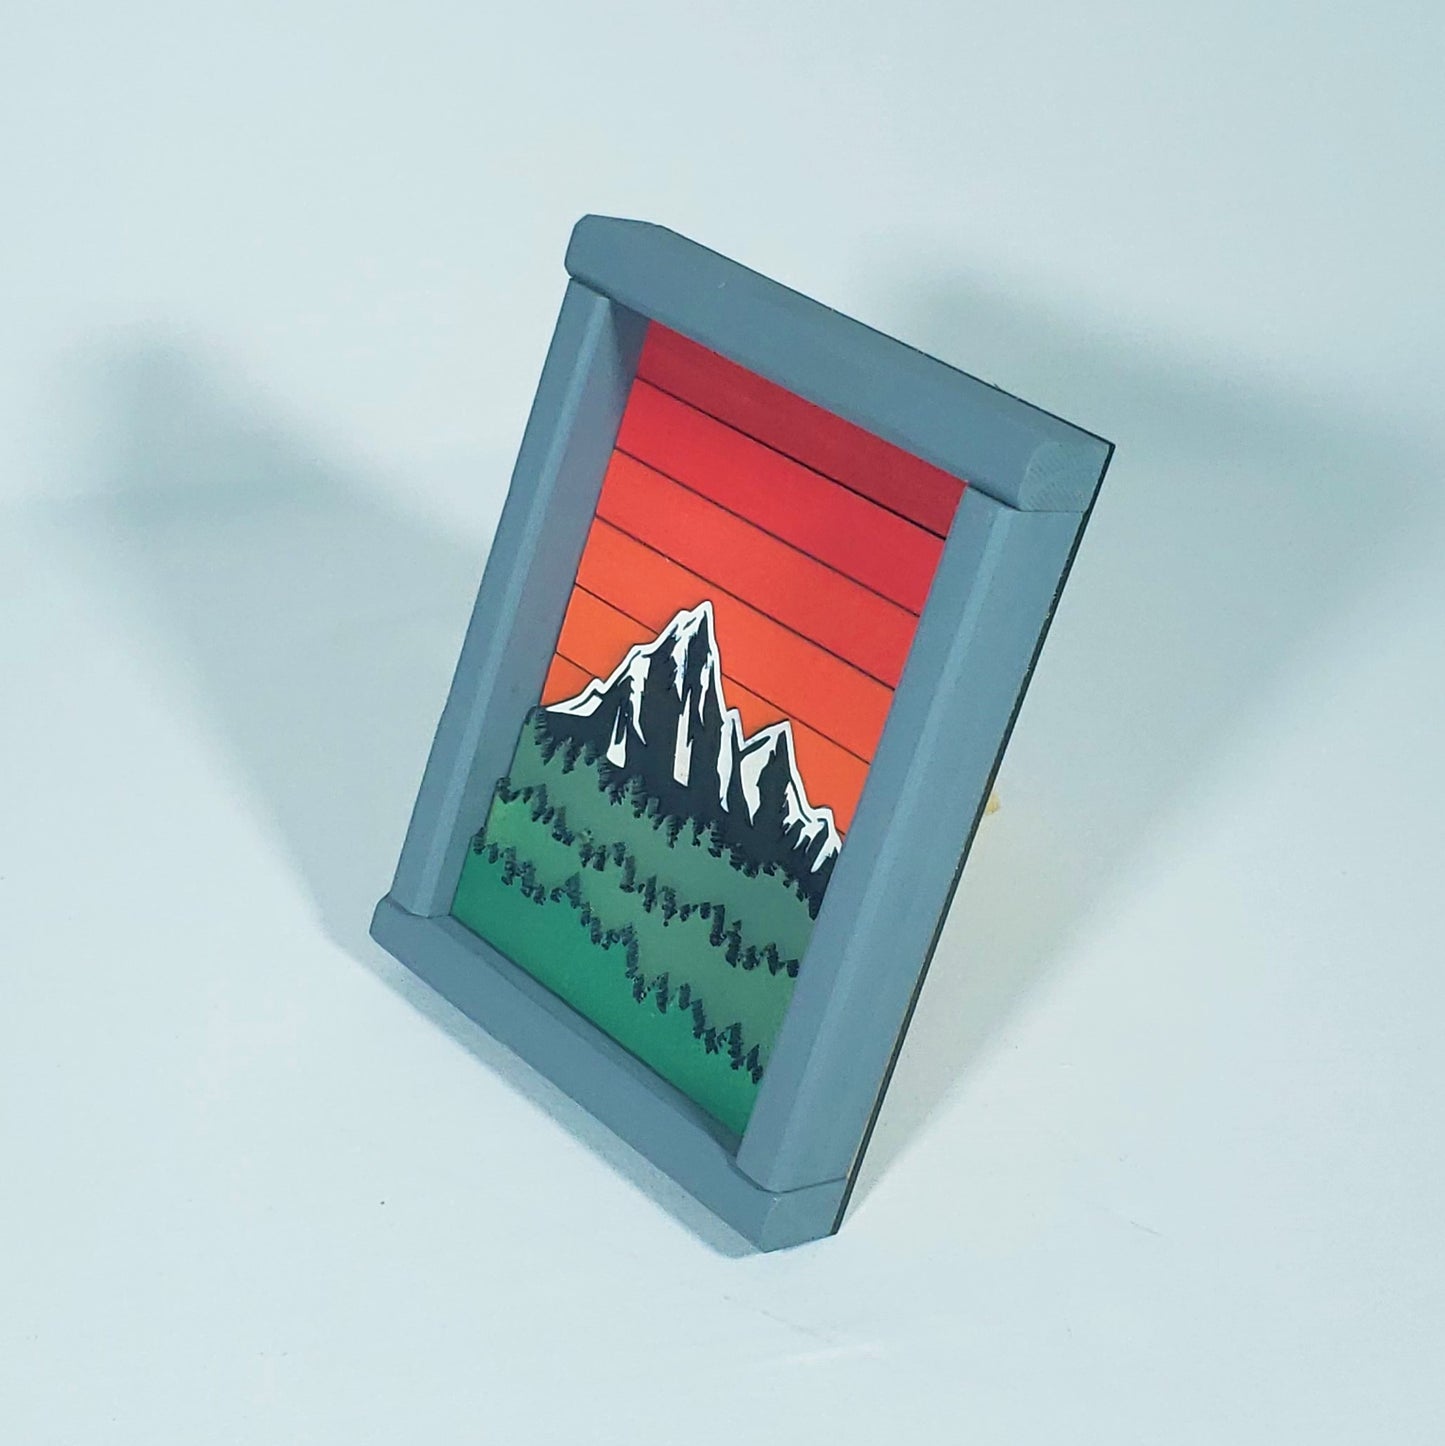 Mountain Art | 6" by 8" | Tree Layers | Personalizable